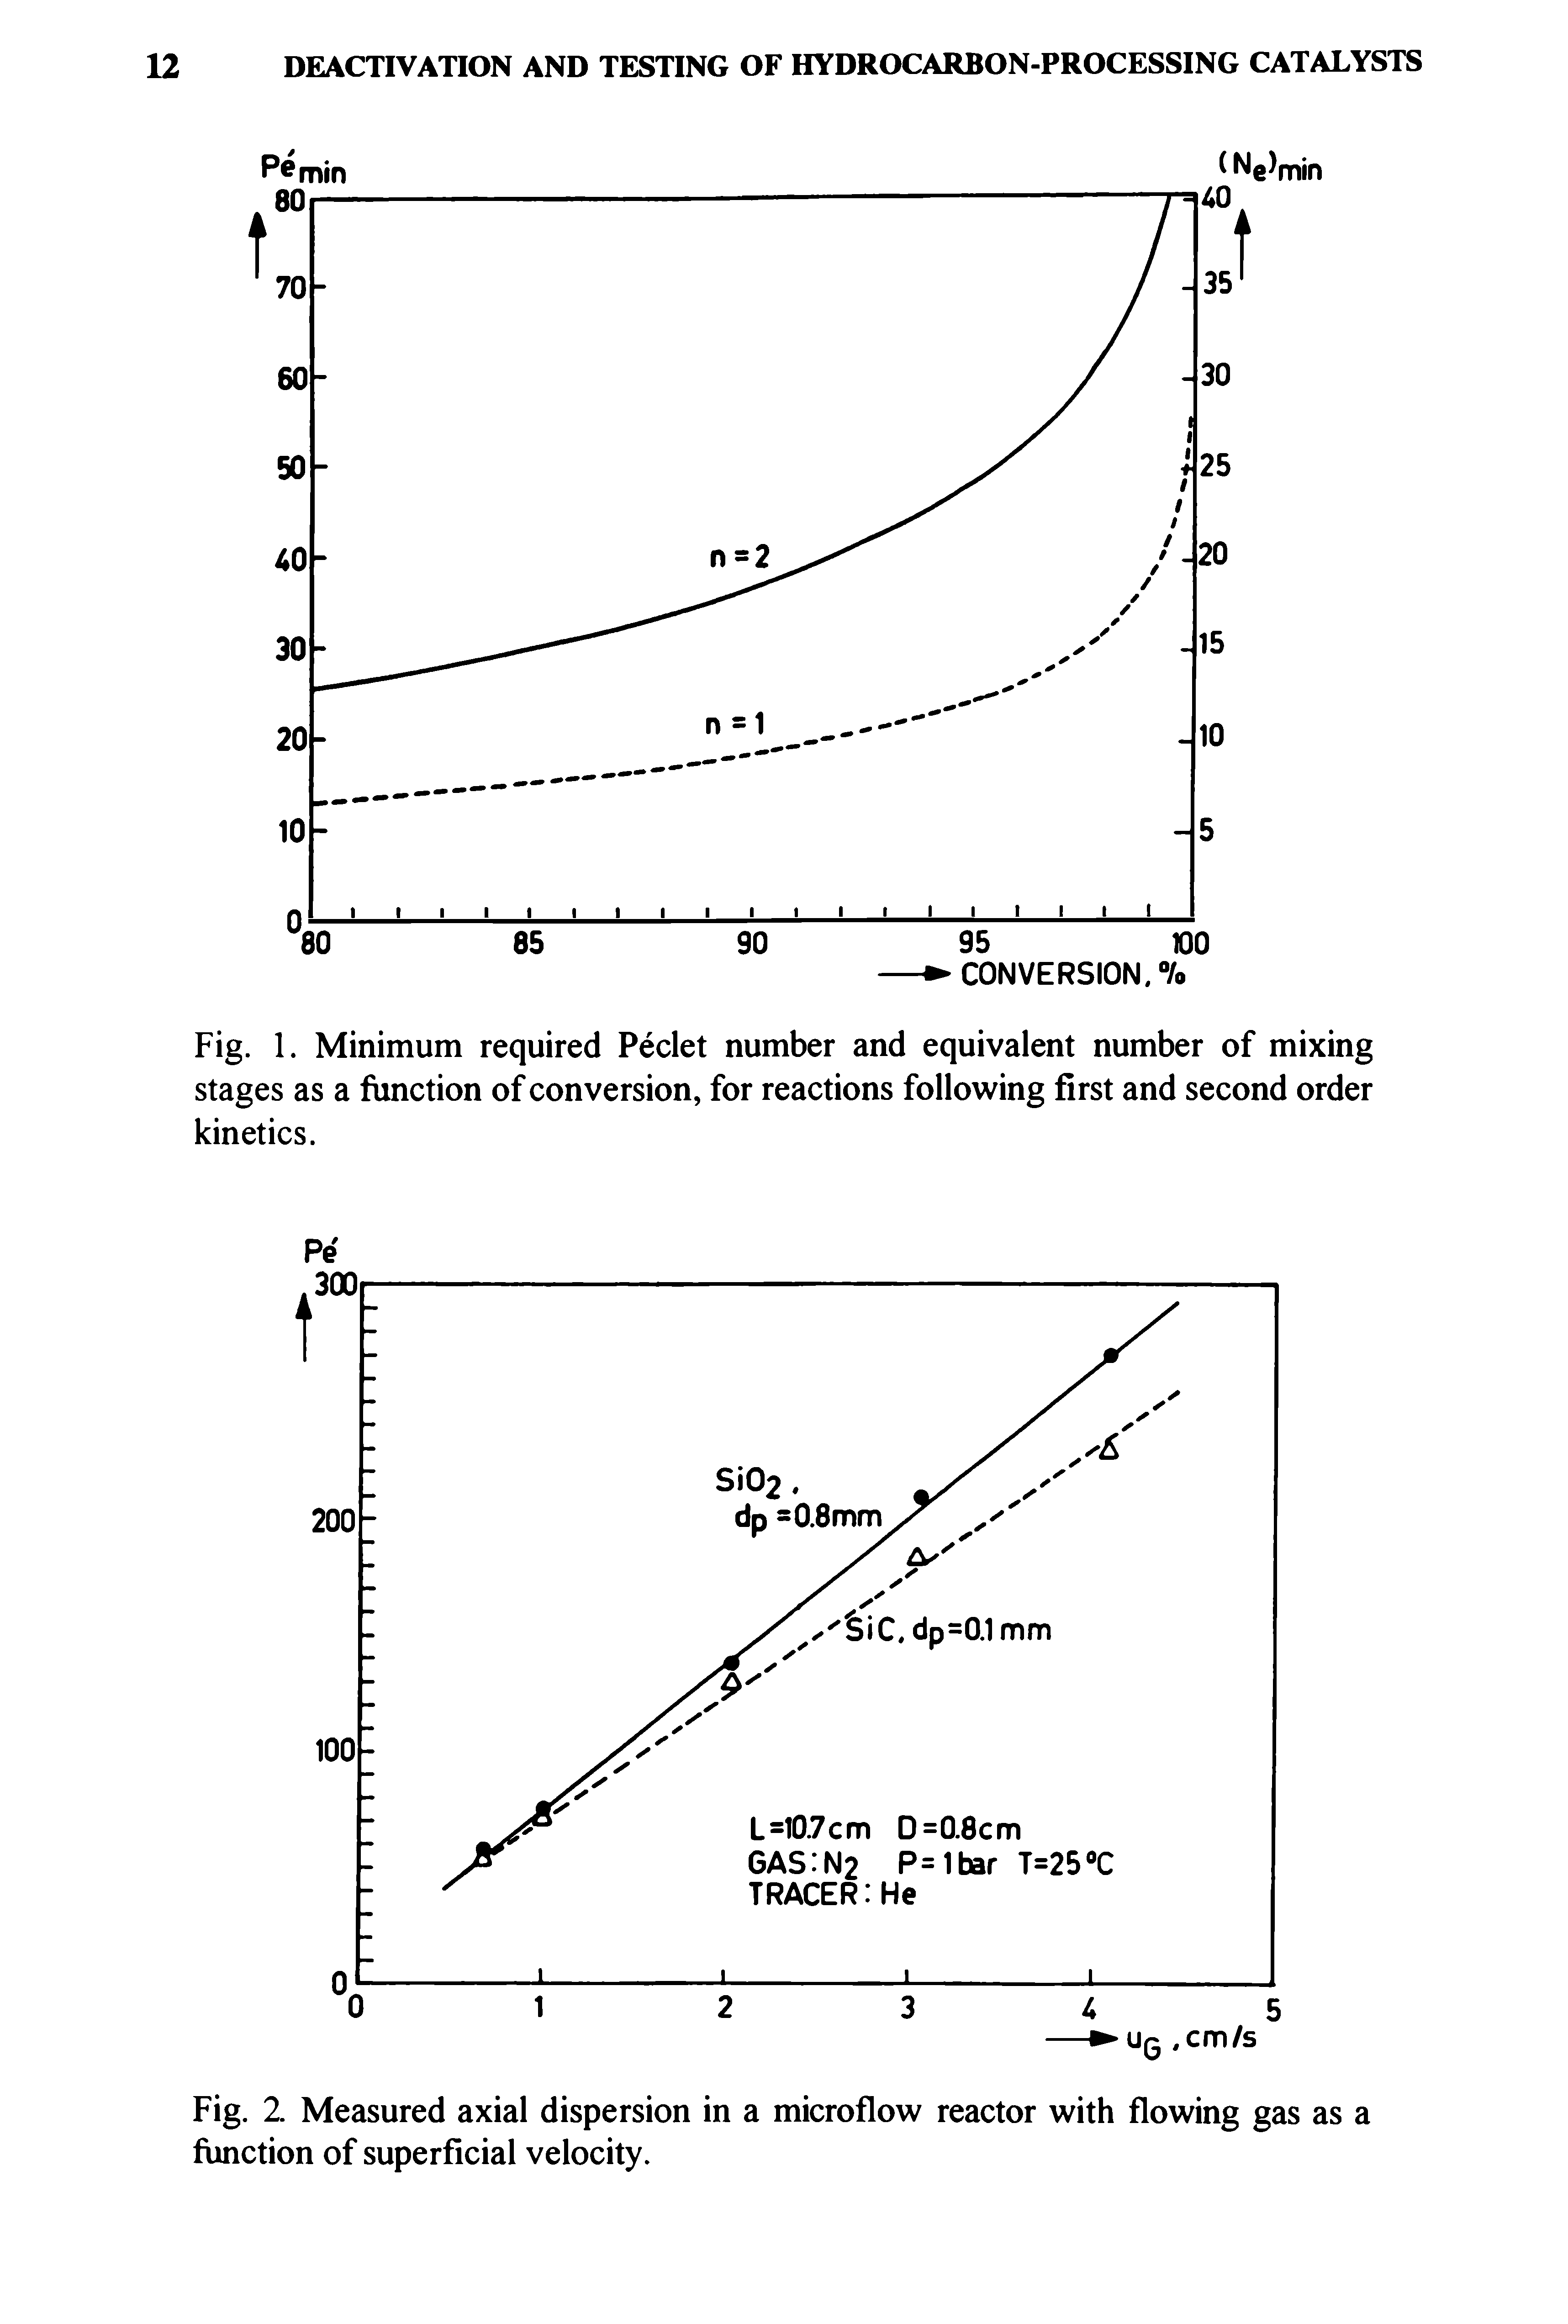 Fig. 2. Measured axial dispersion in a microflow reactor with flowing gas as a function of superficial velocity.